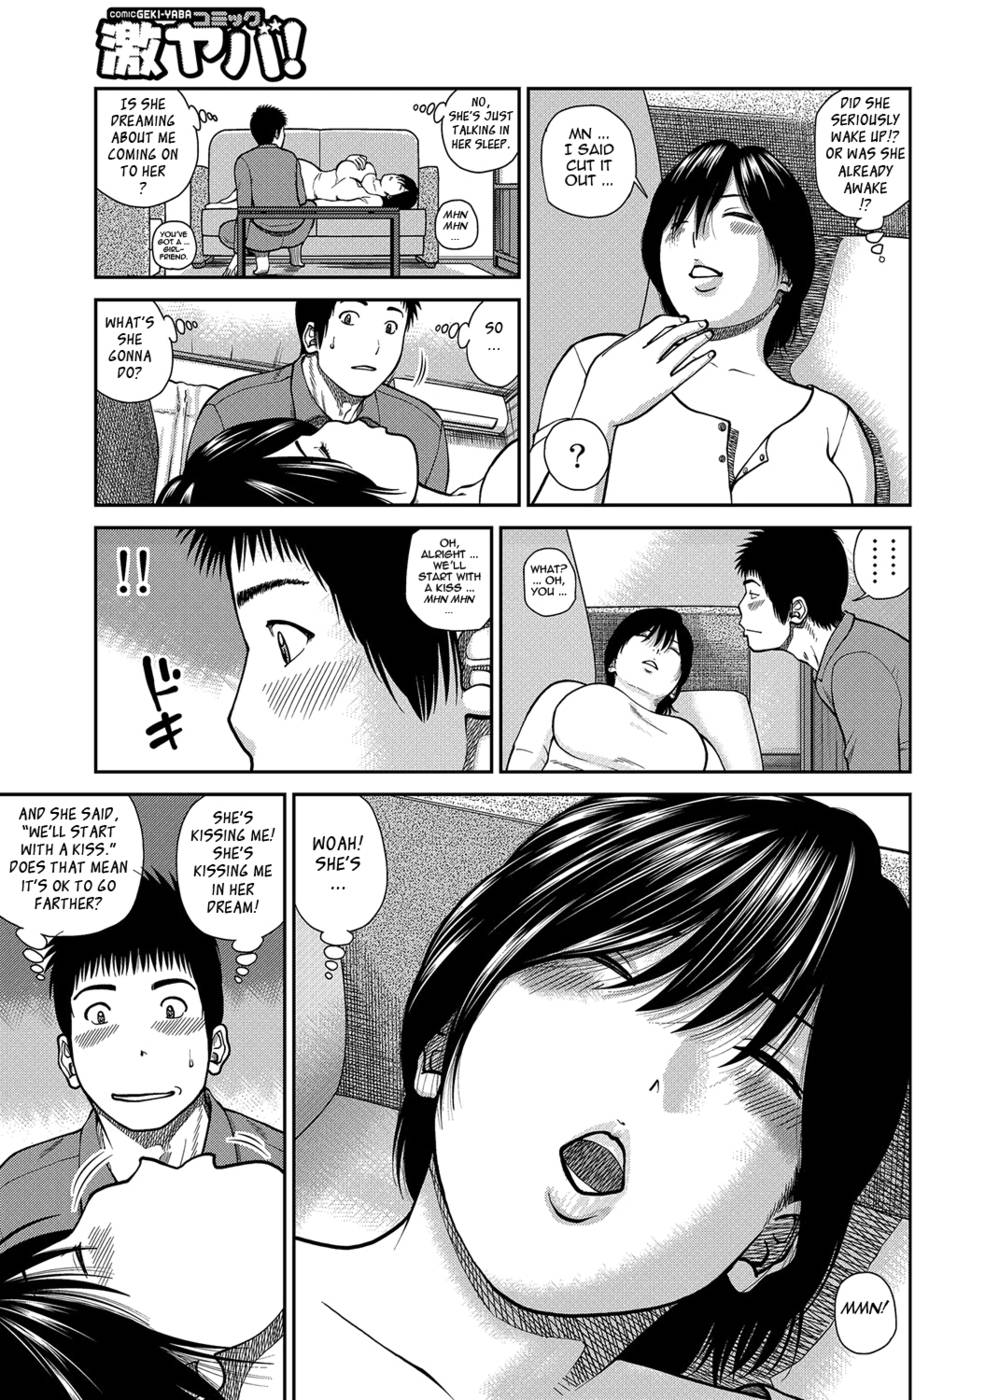 Hentai Manga Comic-34 Year Old Unsatisfied Wife-Chapter 7-Naked Stepmother-Second Half-5